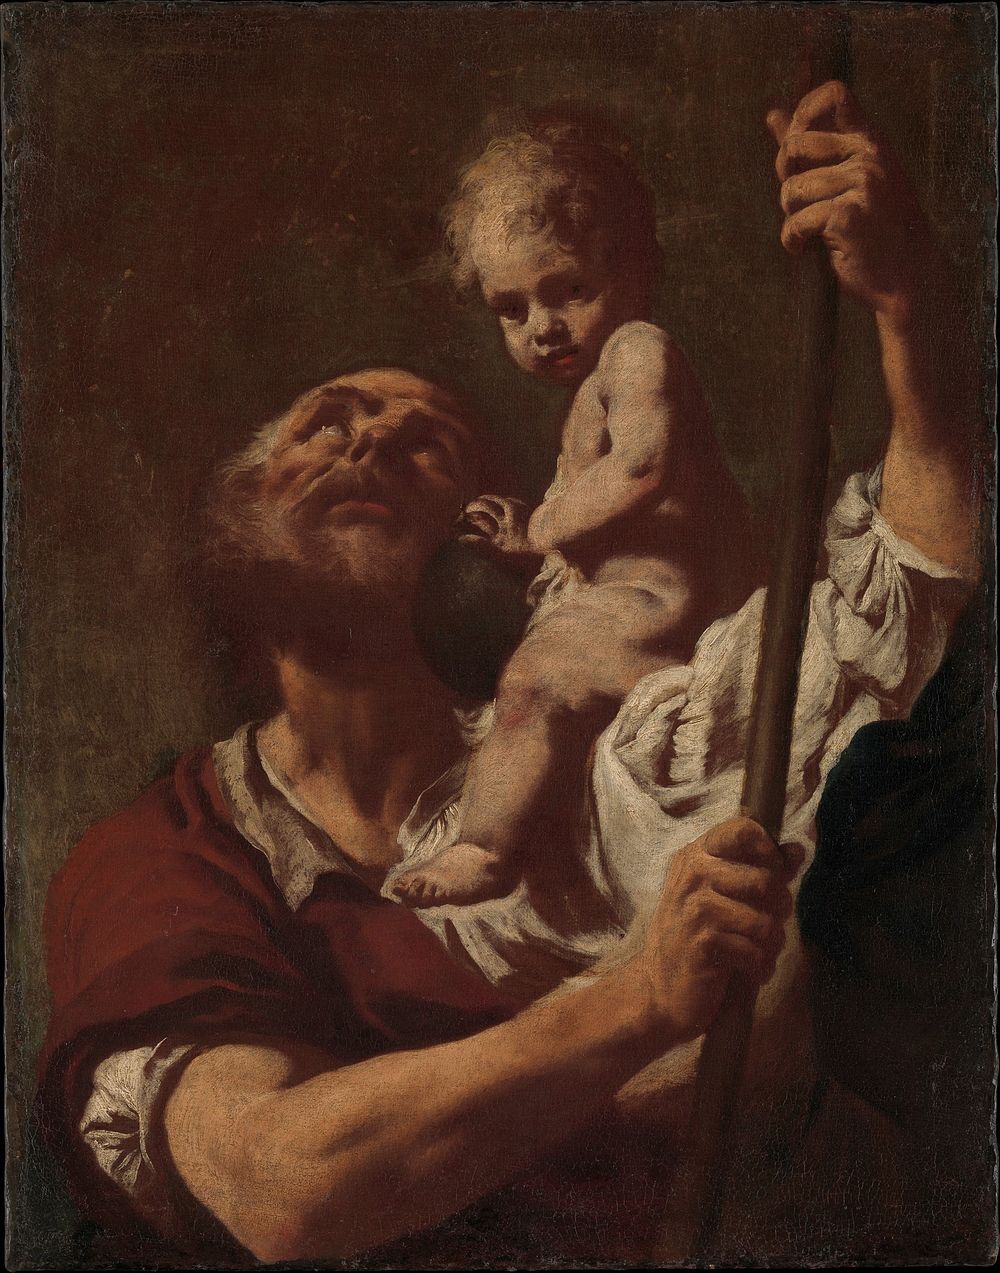 Saint Christopher Carrying the Infant Christ by Giovanni Battista Piazzetta